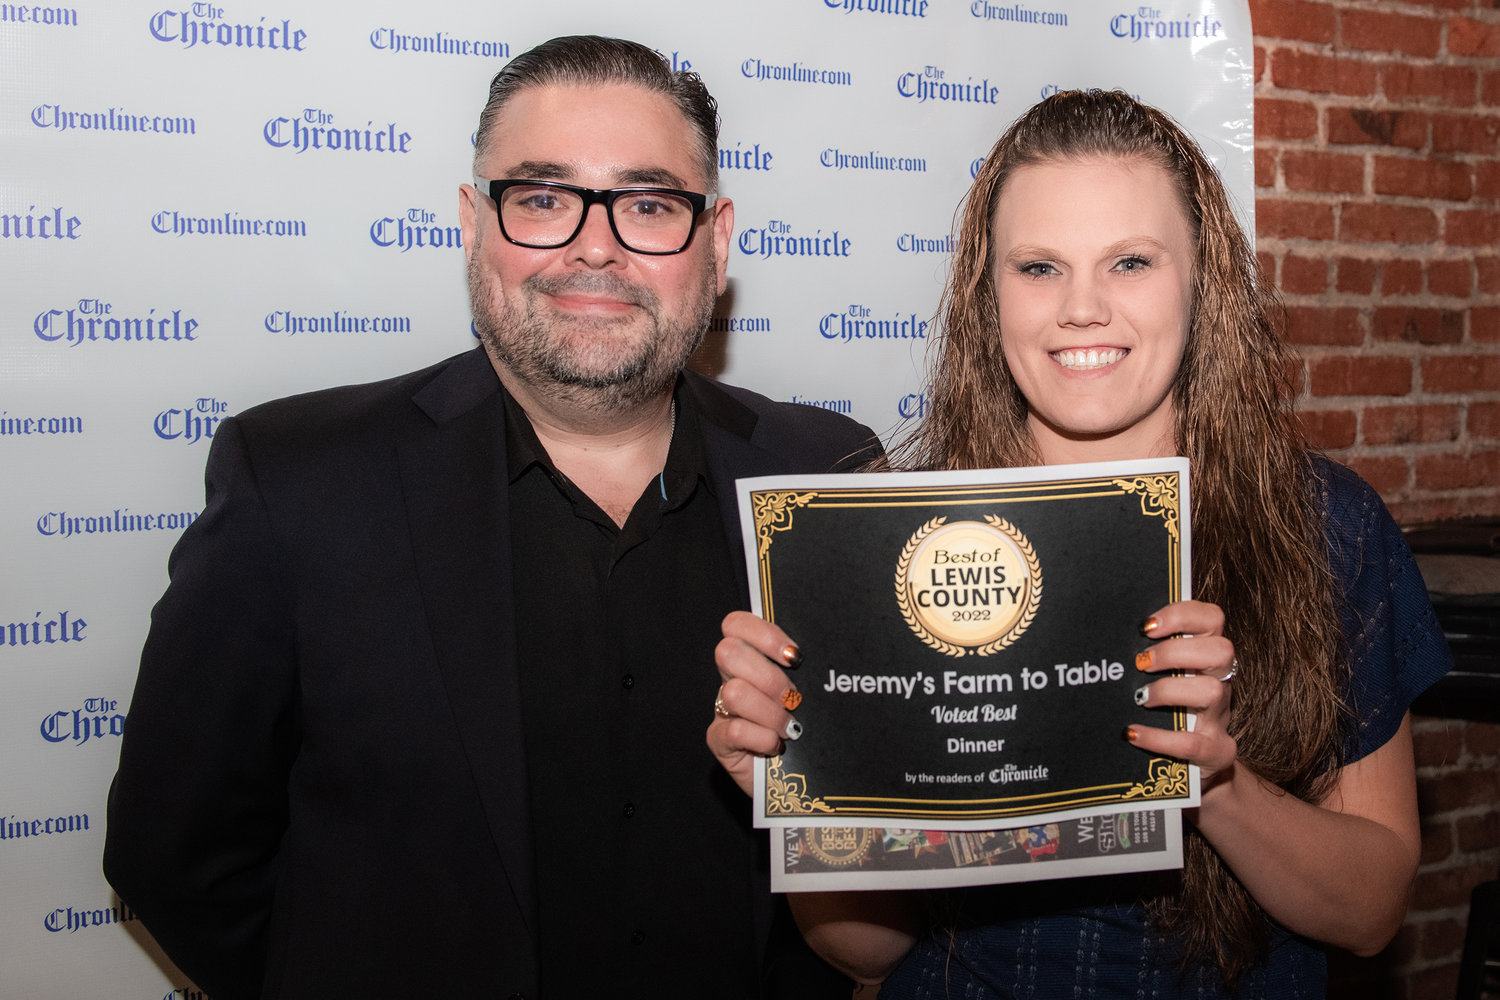 Jeremy’s Farm to Table won “Best Dinner” during the 2022 Best of Lewis County event hosted by The Chronicle at The Juice Box Thursday evening in Centralia.